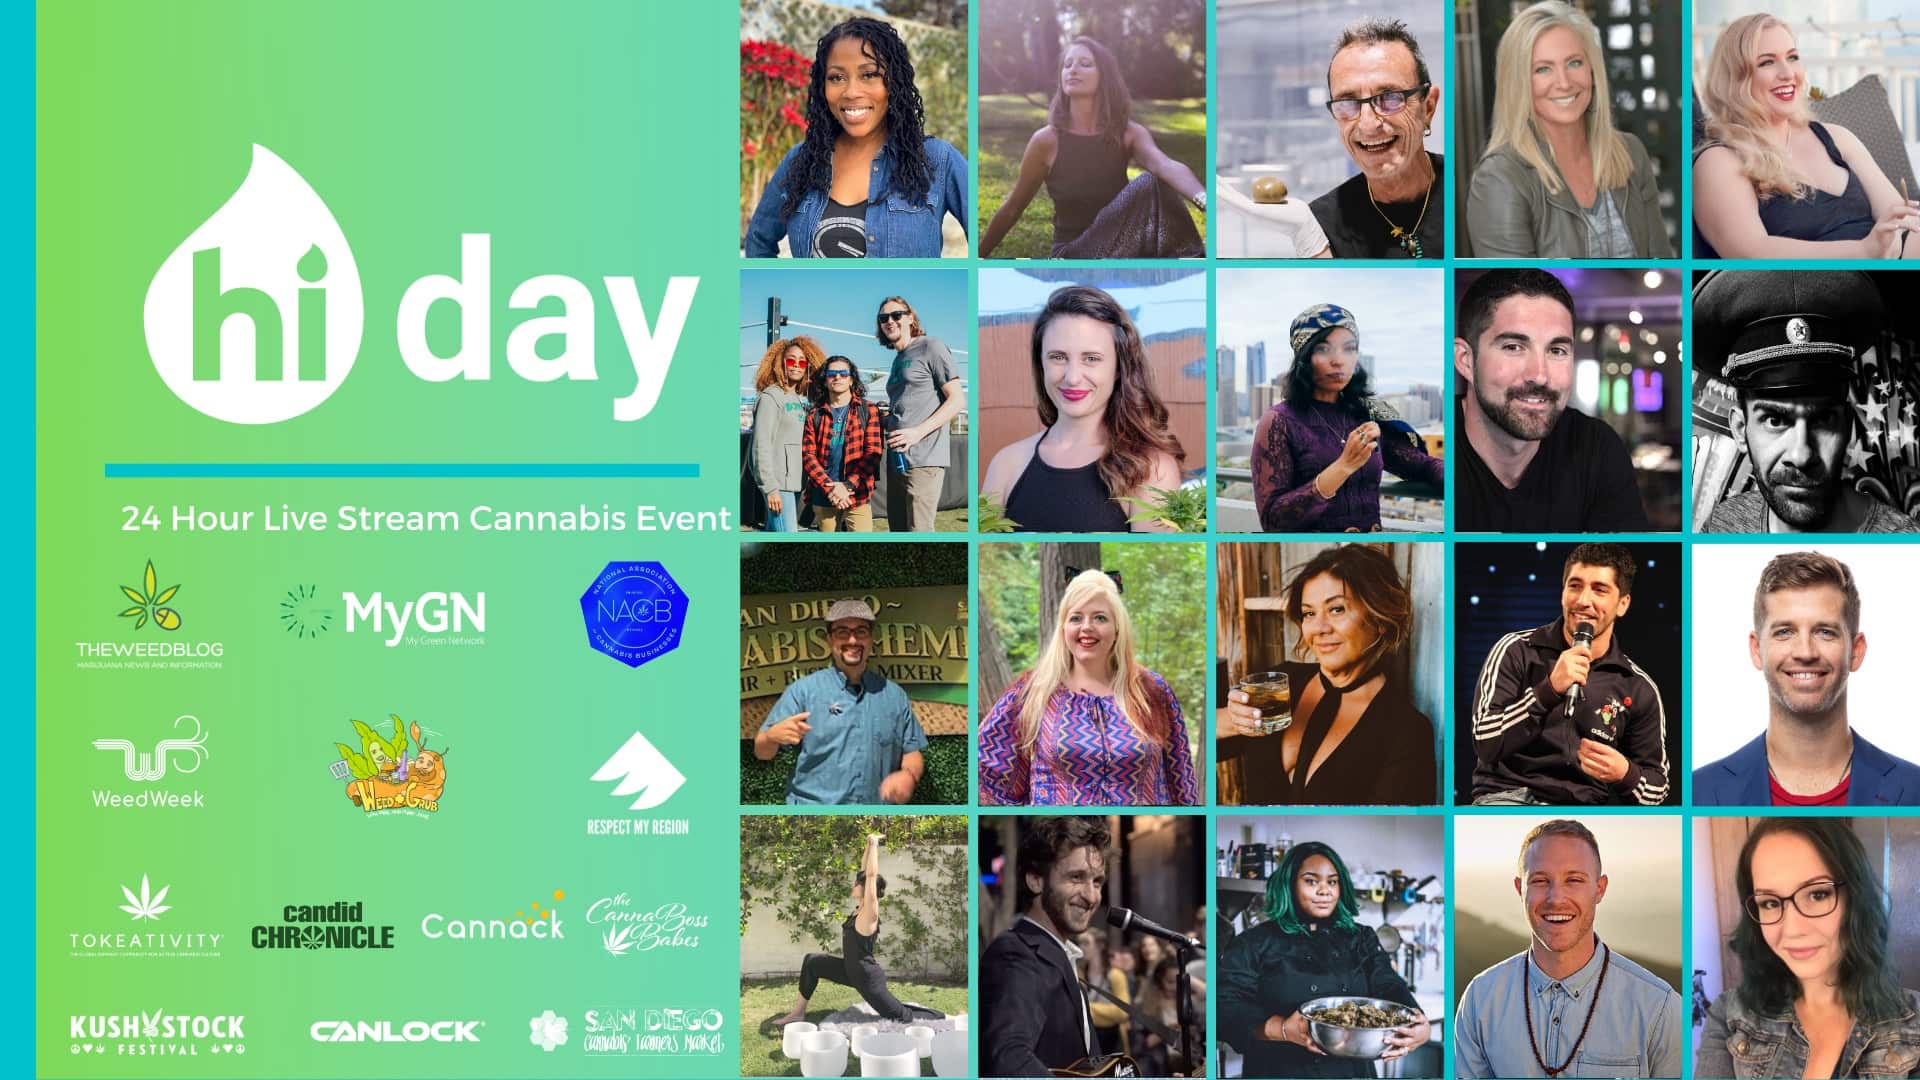 EventHi's Inaugural "Hi Day" Will Feature 23 Back-To-Back Hours of Live-Stream Events Showcasing Cannabis Culture